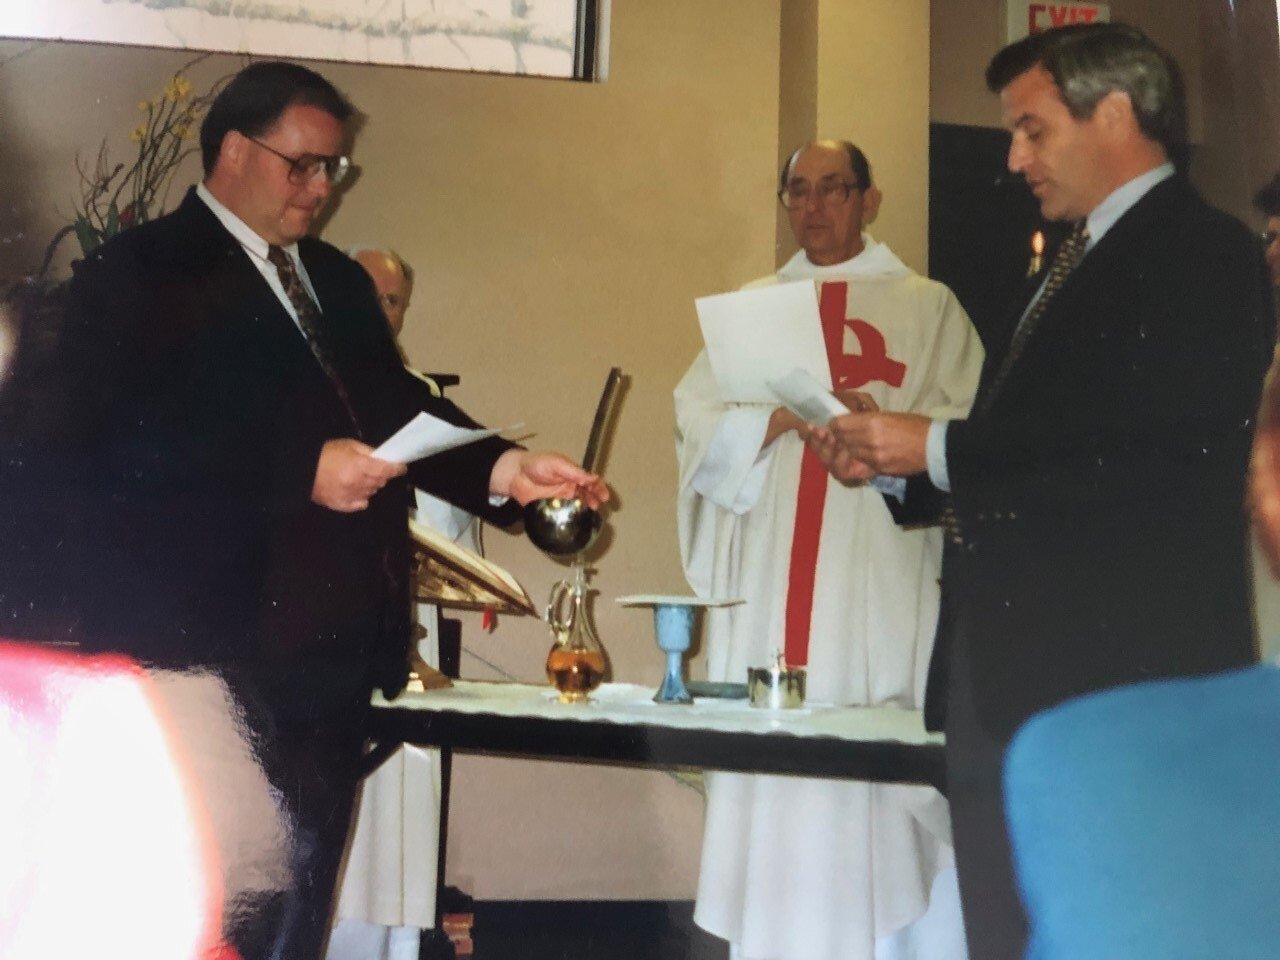  Tony Ryan (far right) reads at the Project Host Soup Kitchen dedication in 1994. 